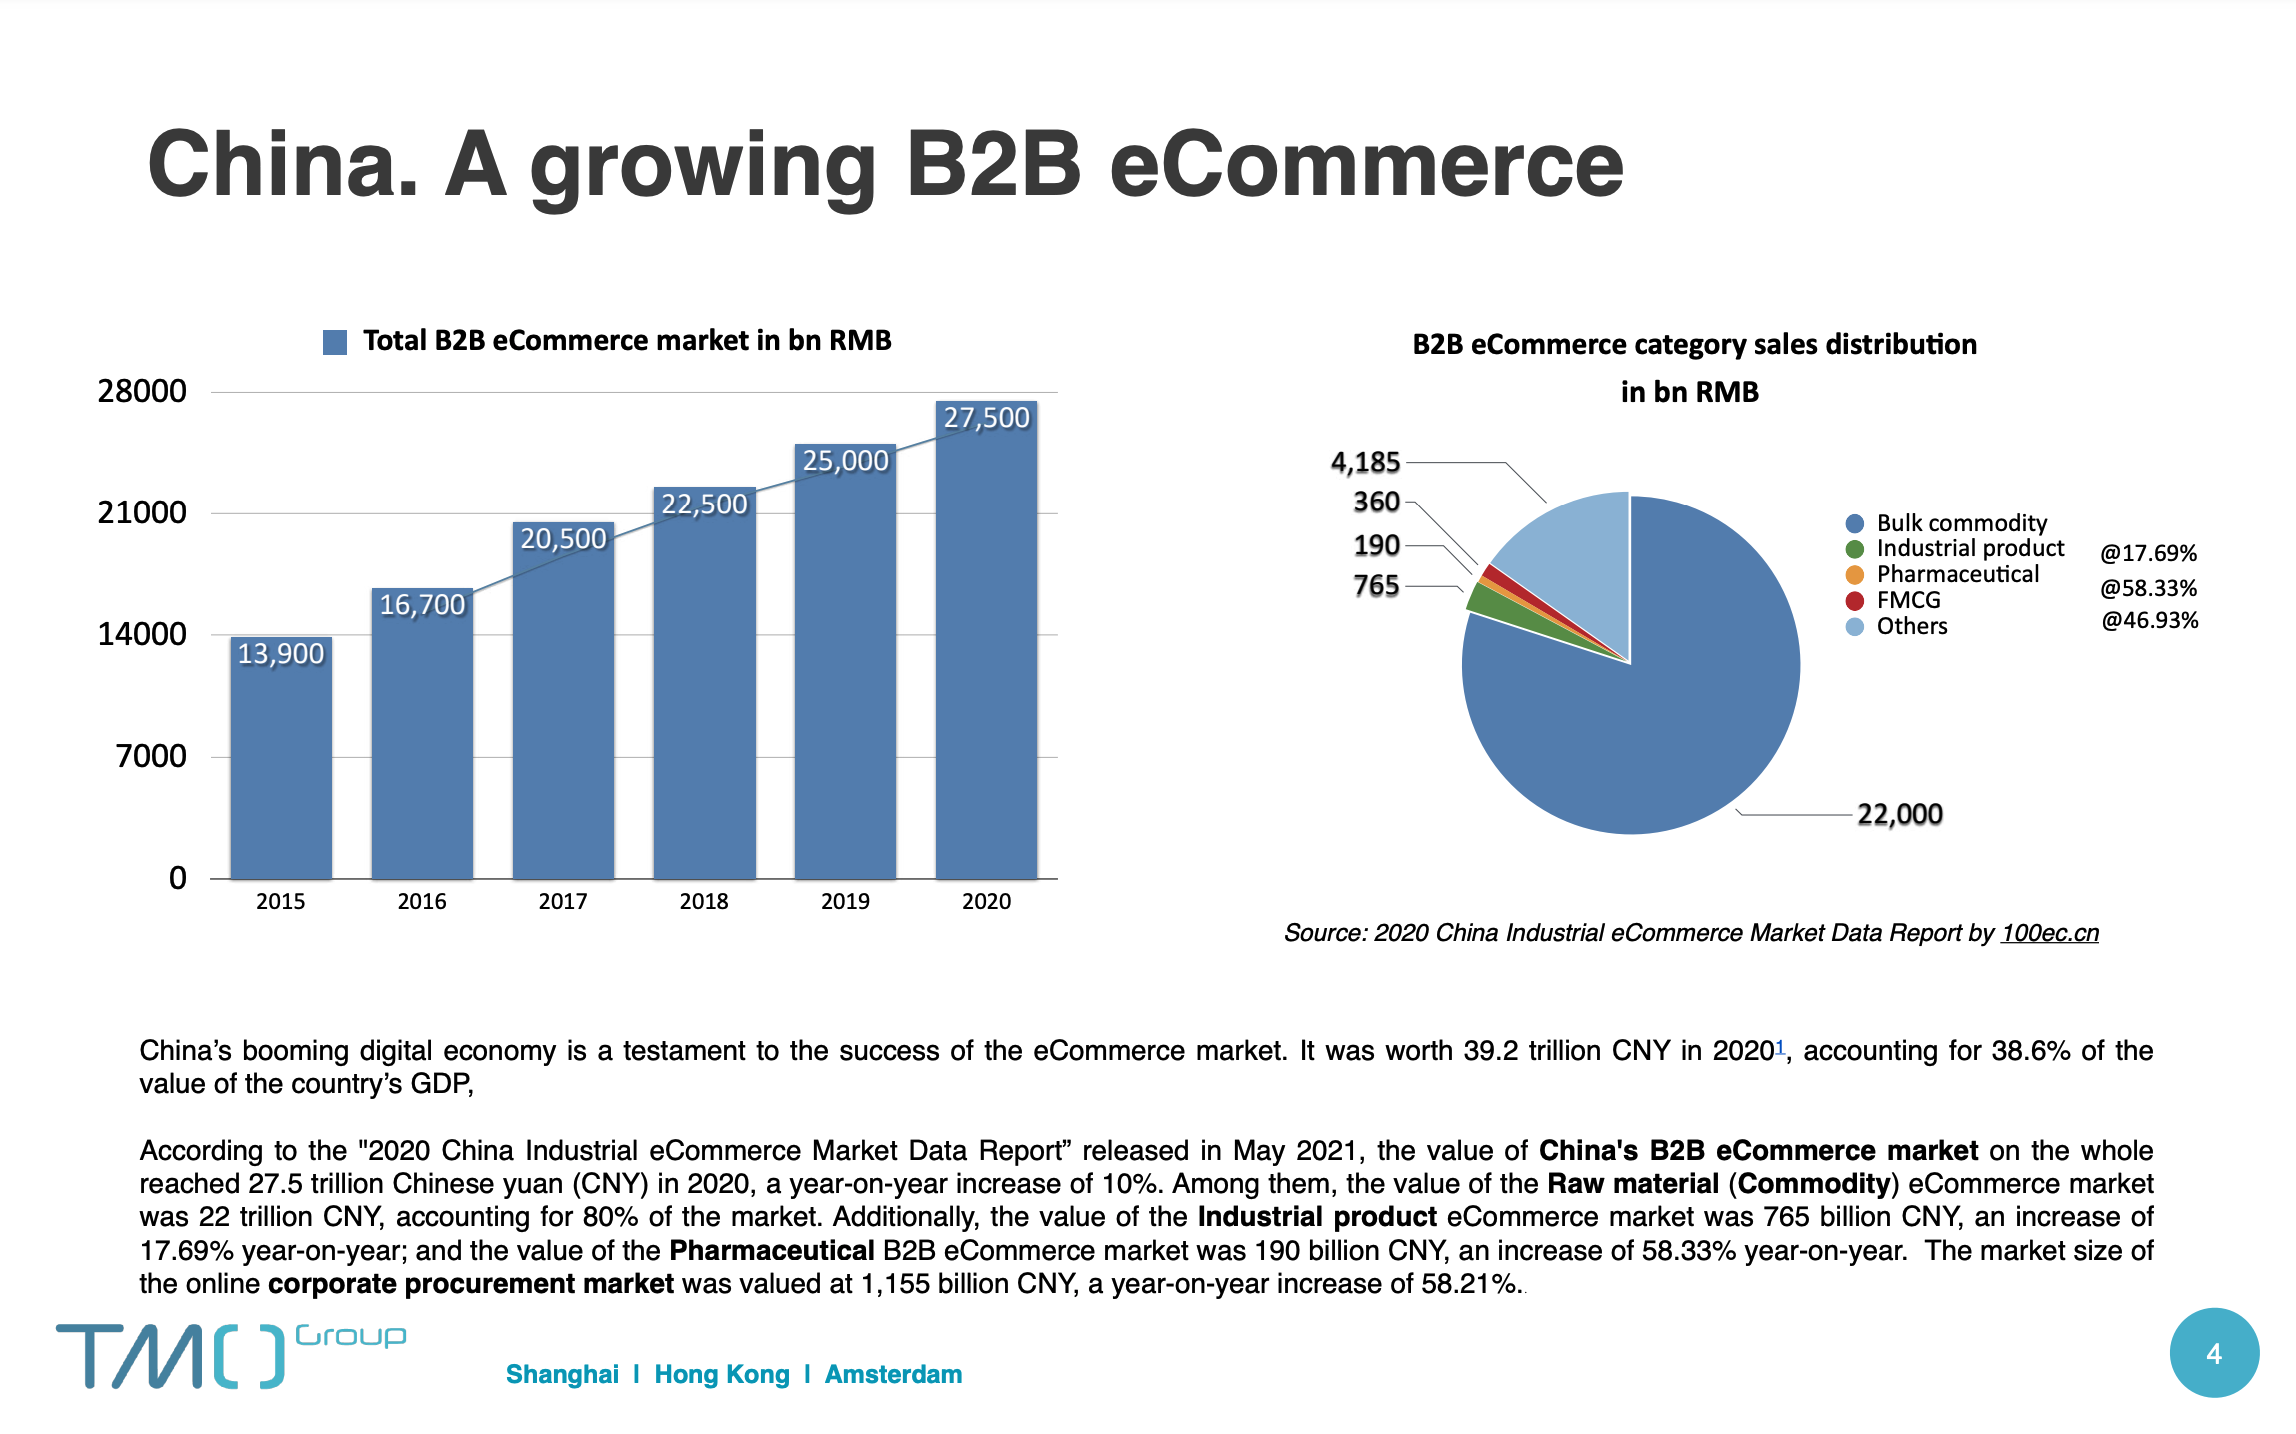 Scale your business through B2B e Commerce in China